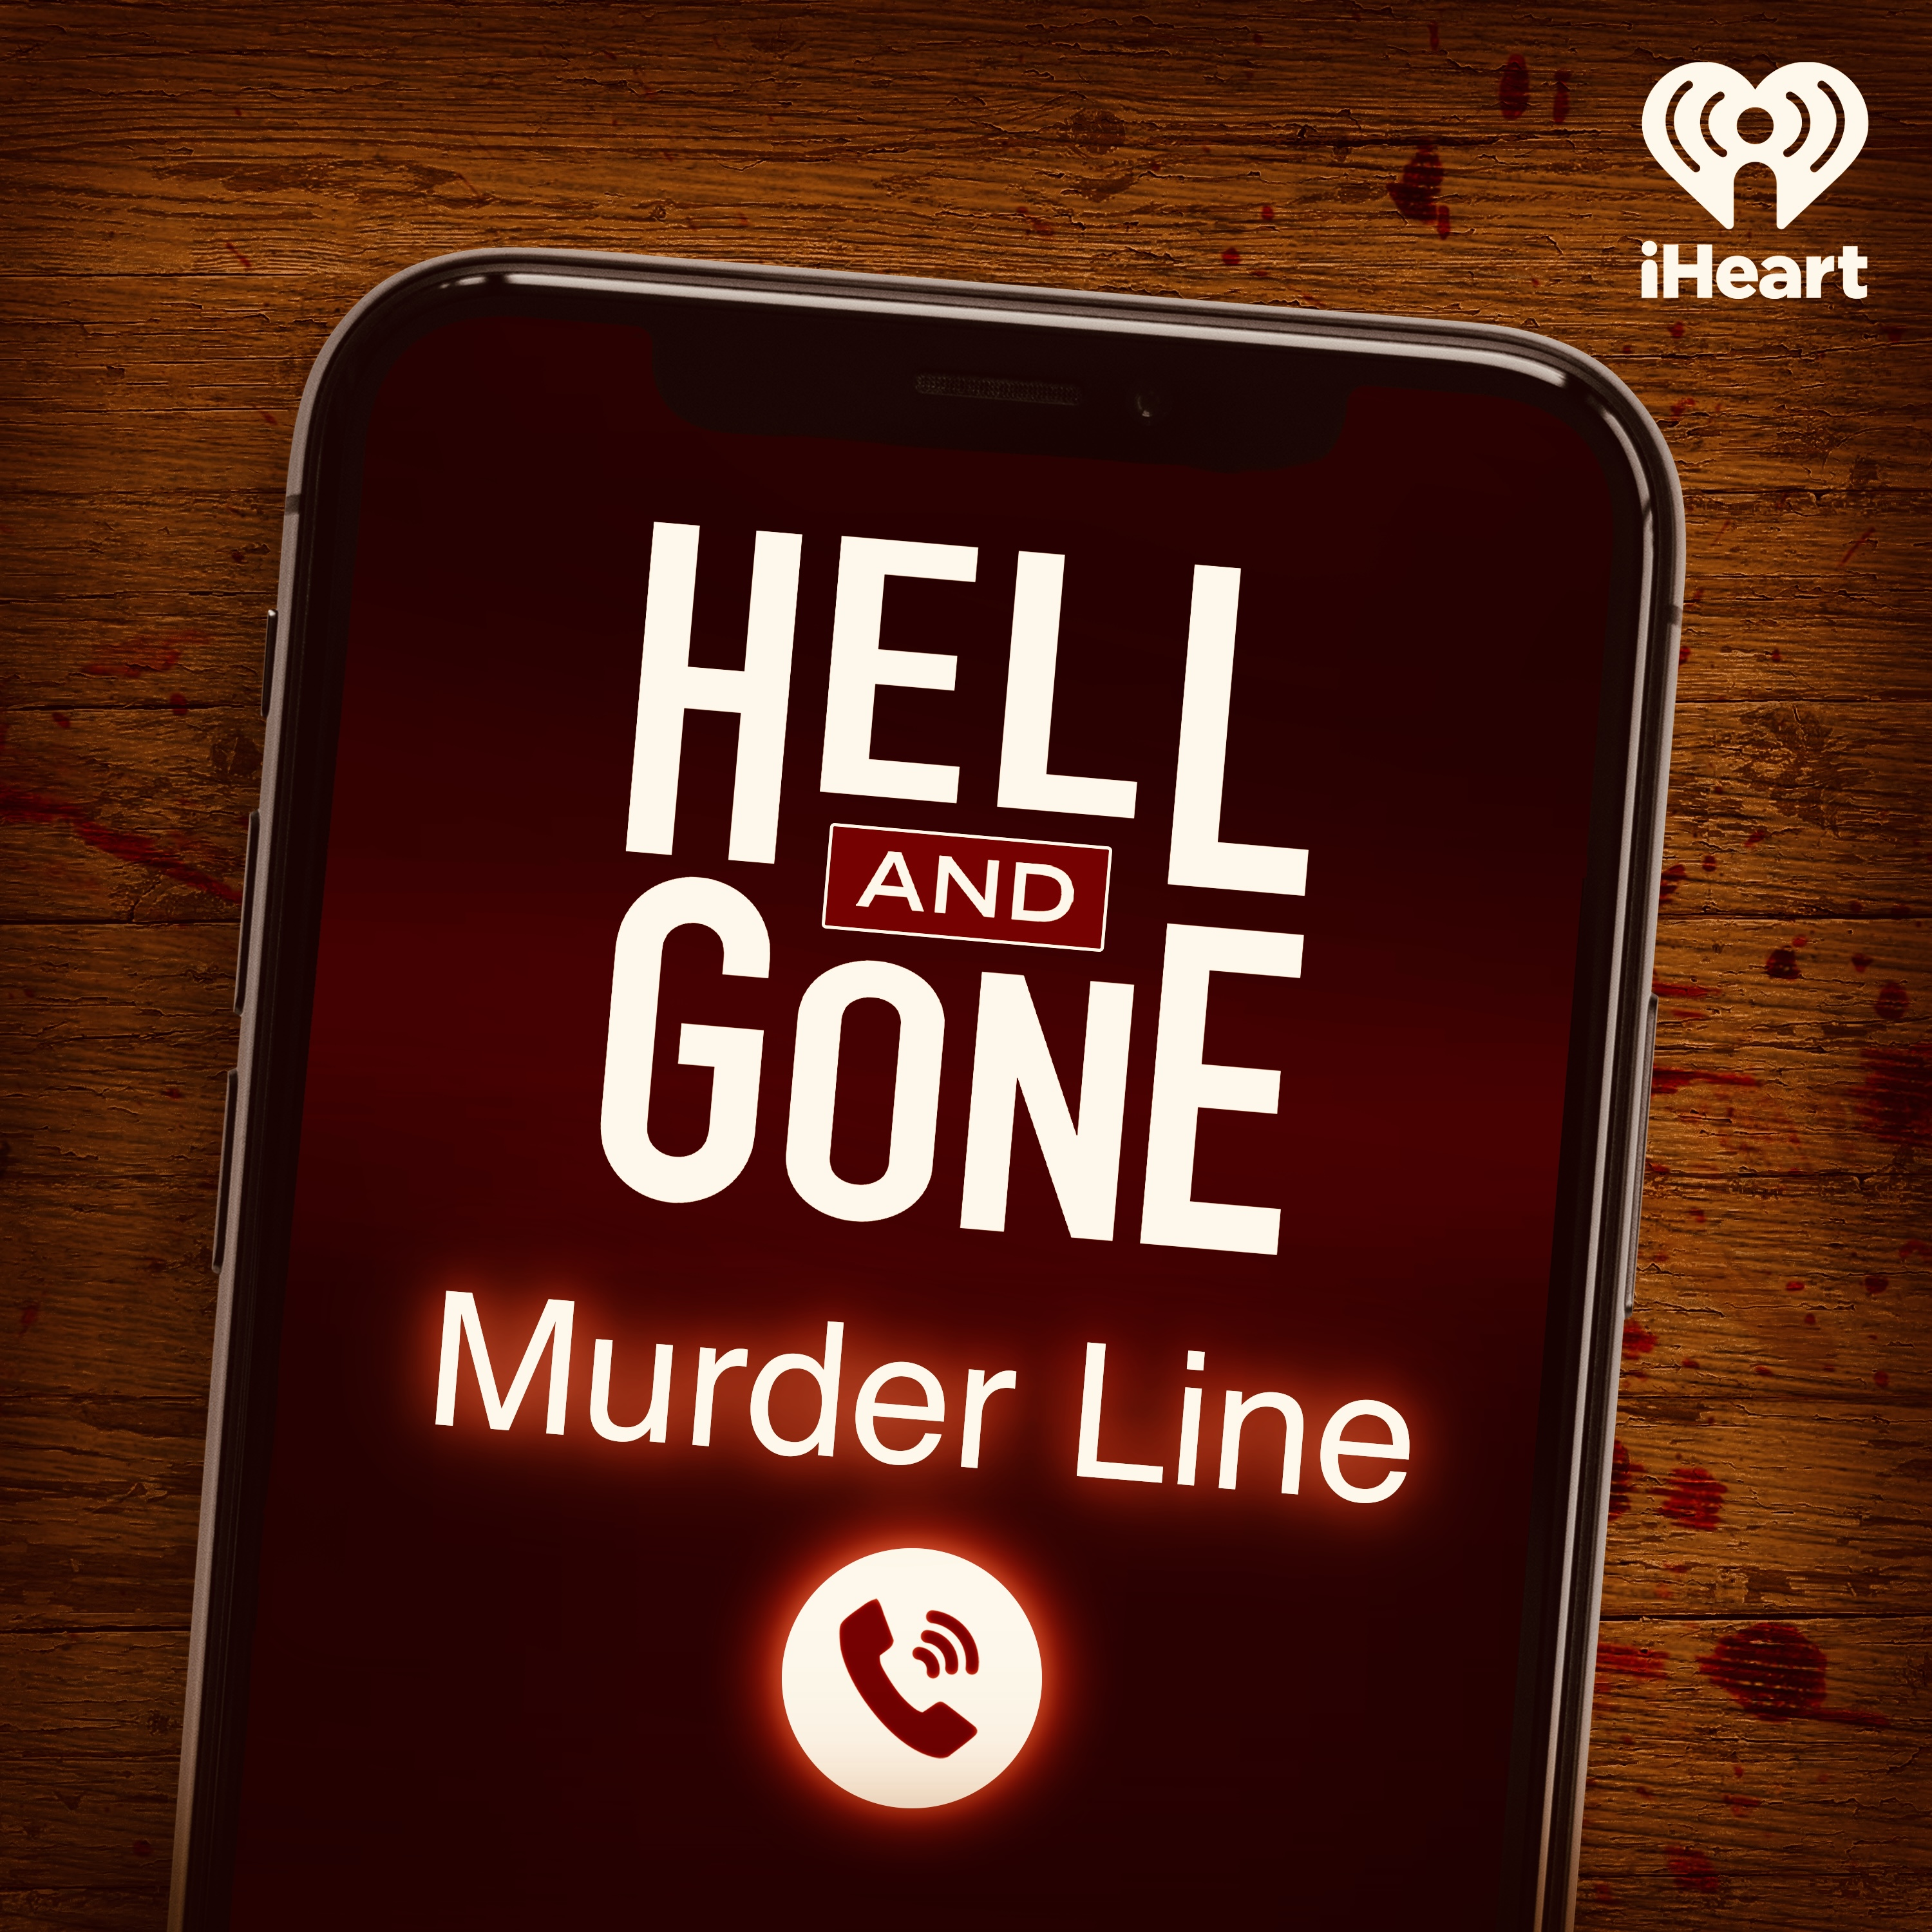 Hell and Gone Murder Line: Justin Gaines